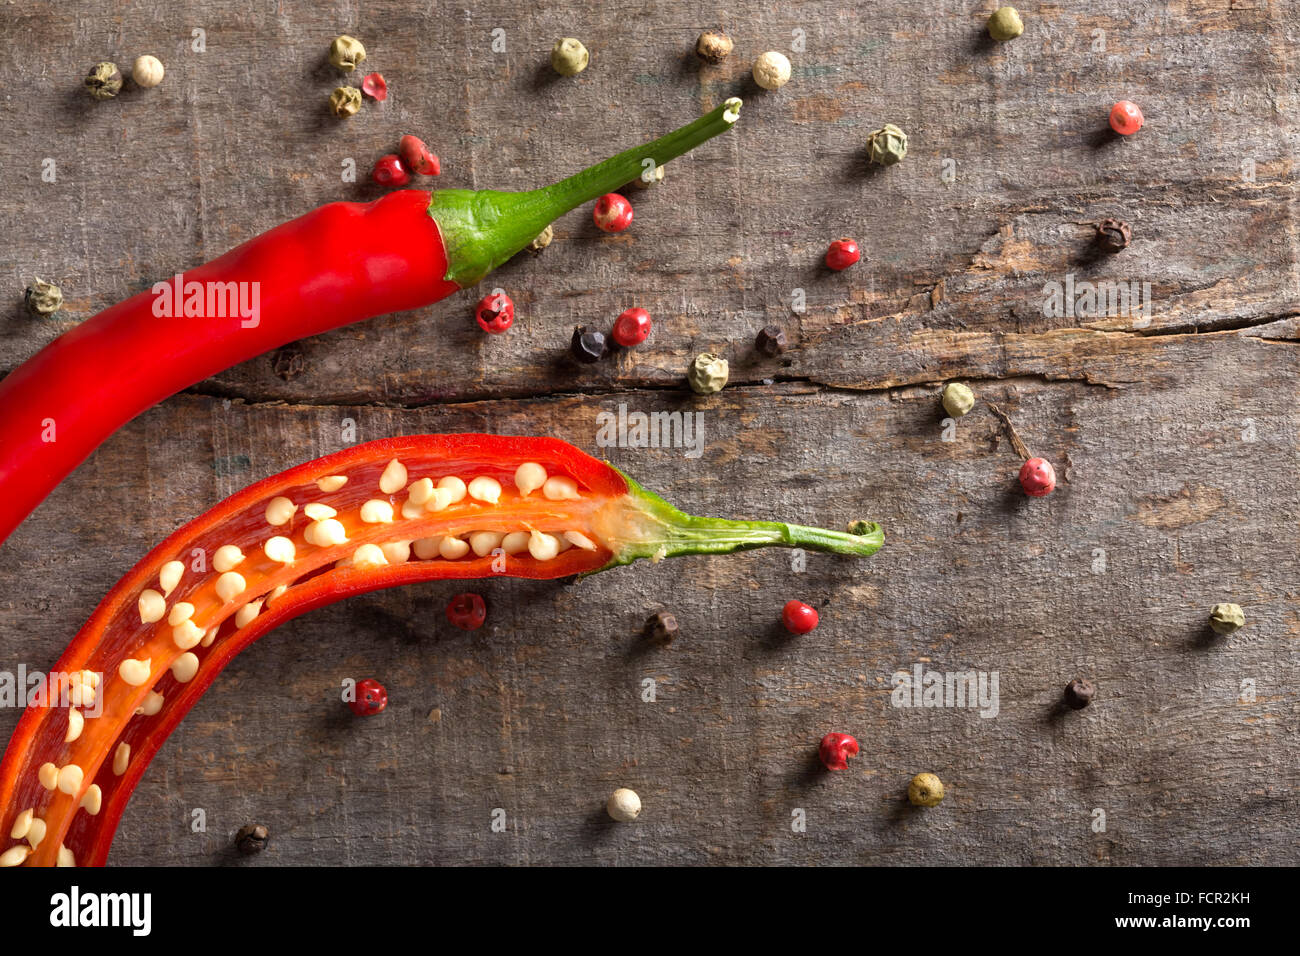 Red chili peppers on wood with peppercorns Stock Photo